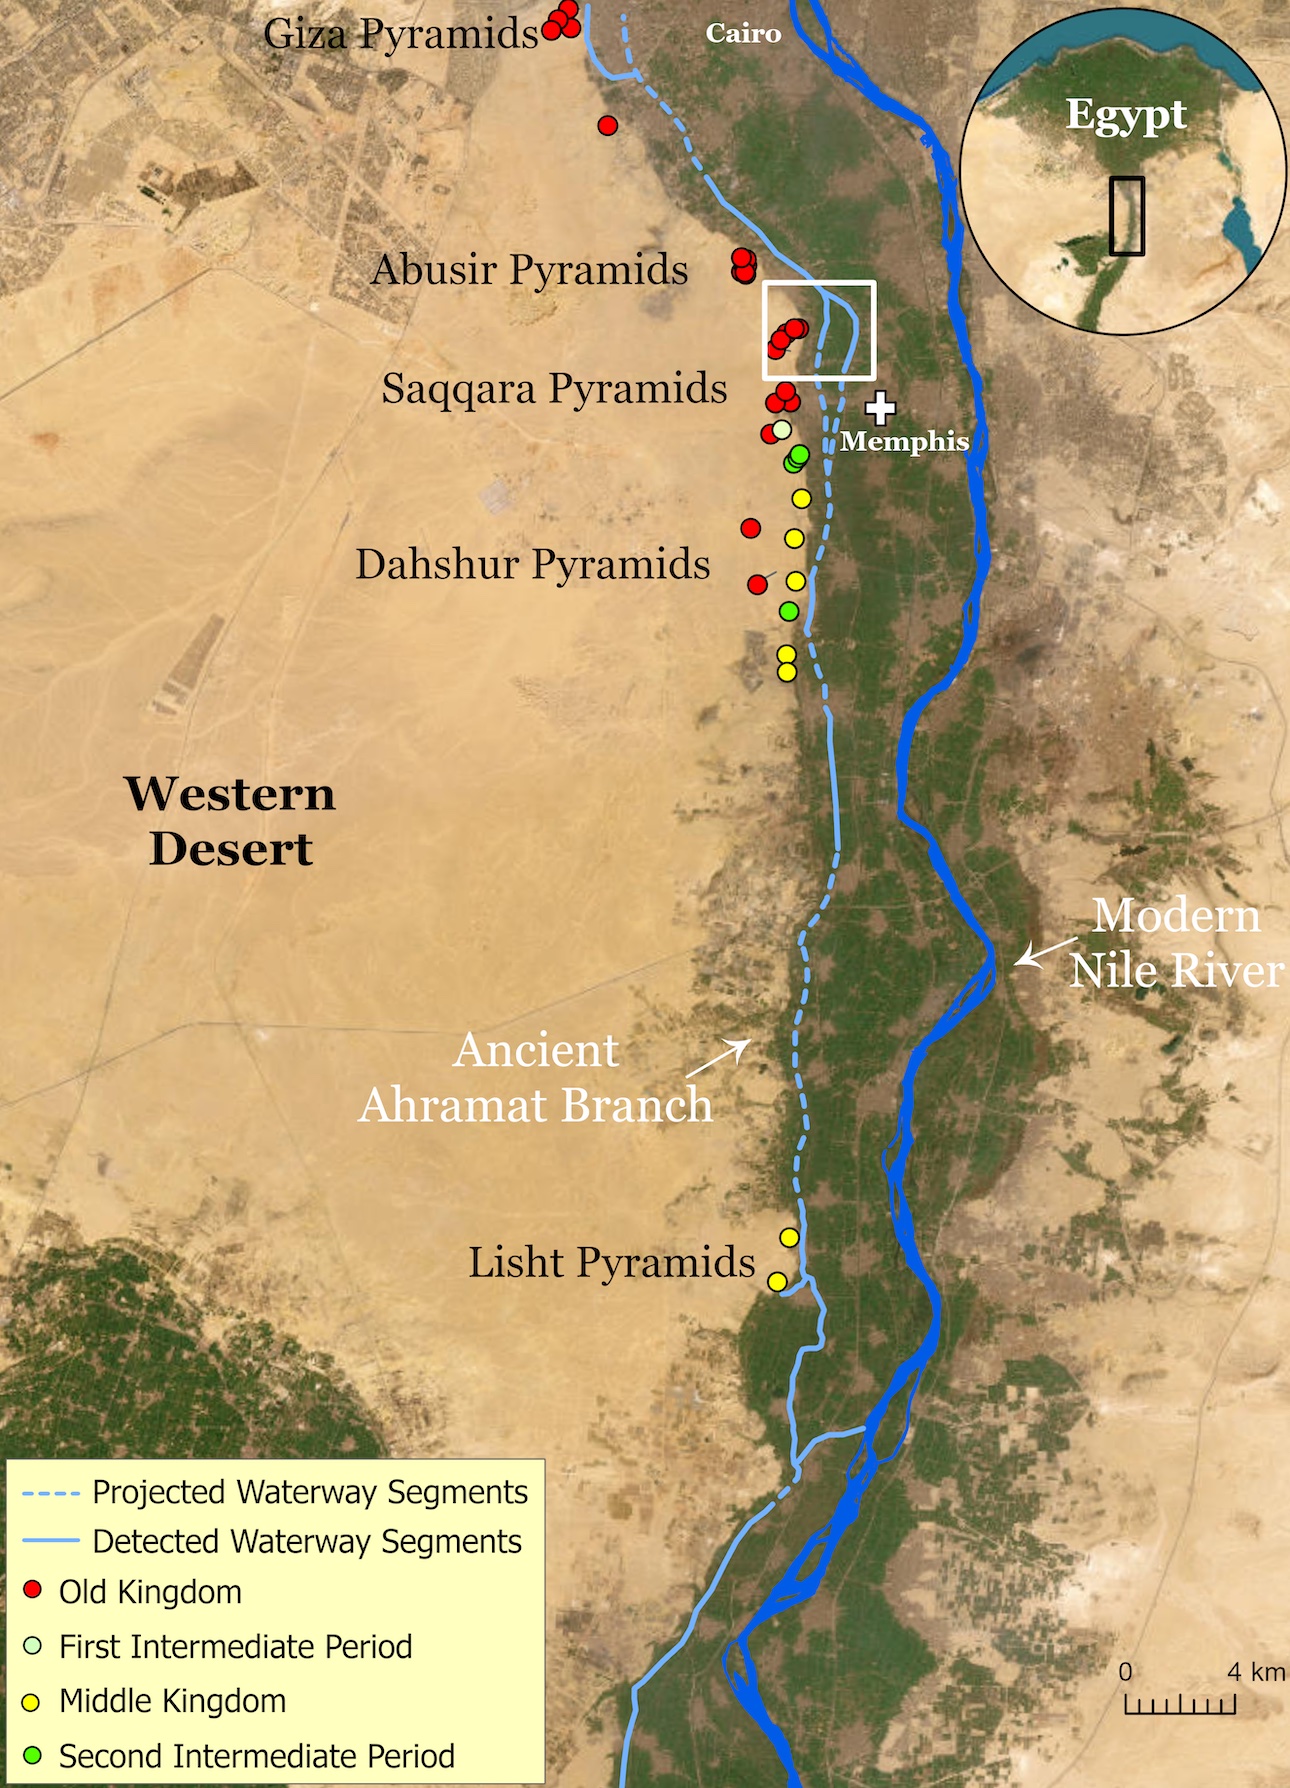 A map of northern Egypt that shows landmarks from the Giza Pyramids at the top to the Lisht Pyramids at the bottom. Vertically through the middle of the map, the modern Nile River cuts through, and to its left, a thinner line depicts projected and detected waterways. The Western Desert lies to the left.